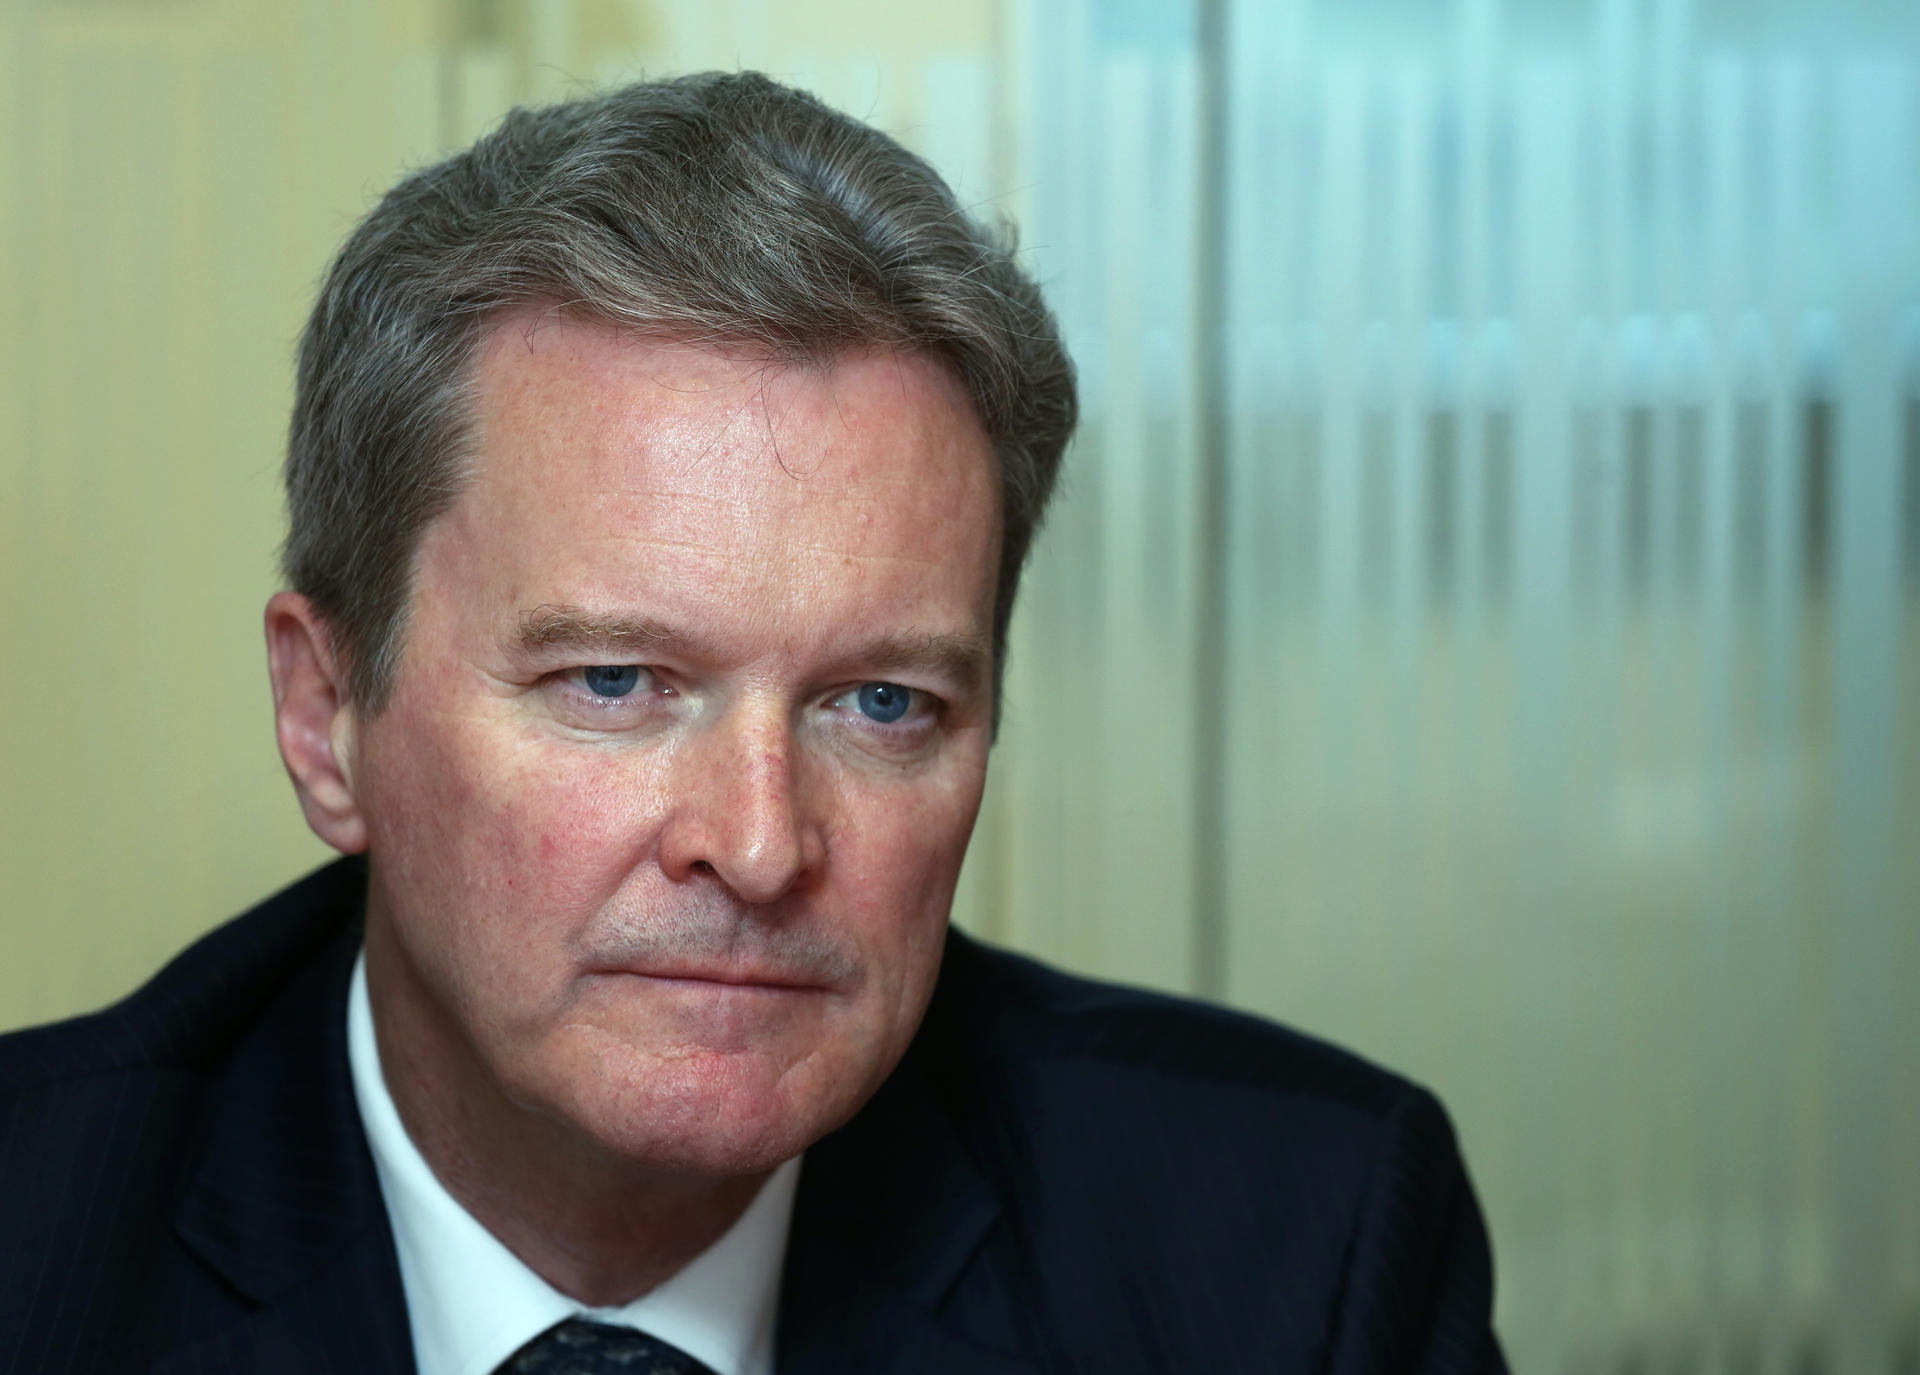 Colin Hansen of AdvantageBC wants to encourage the use of renminbi. Photo: SCMP Pictures